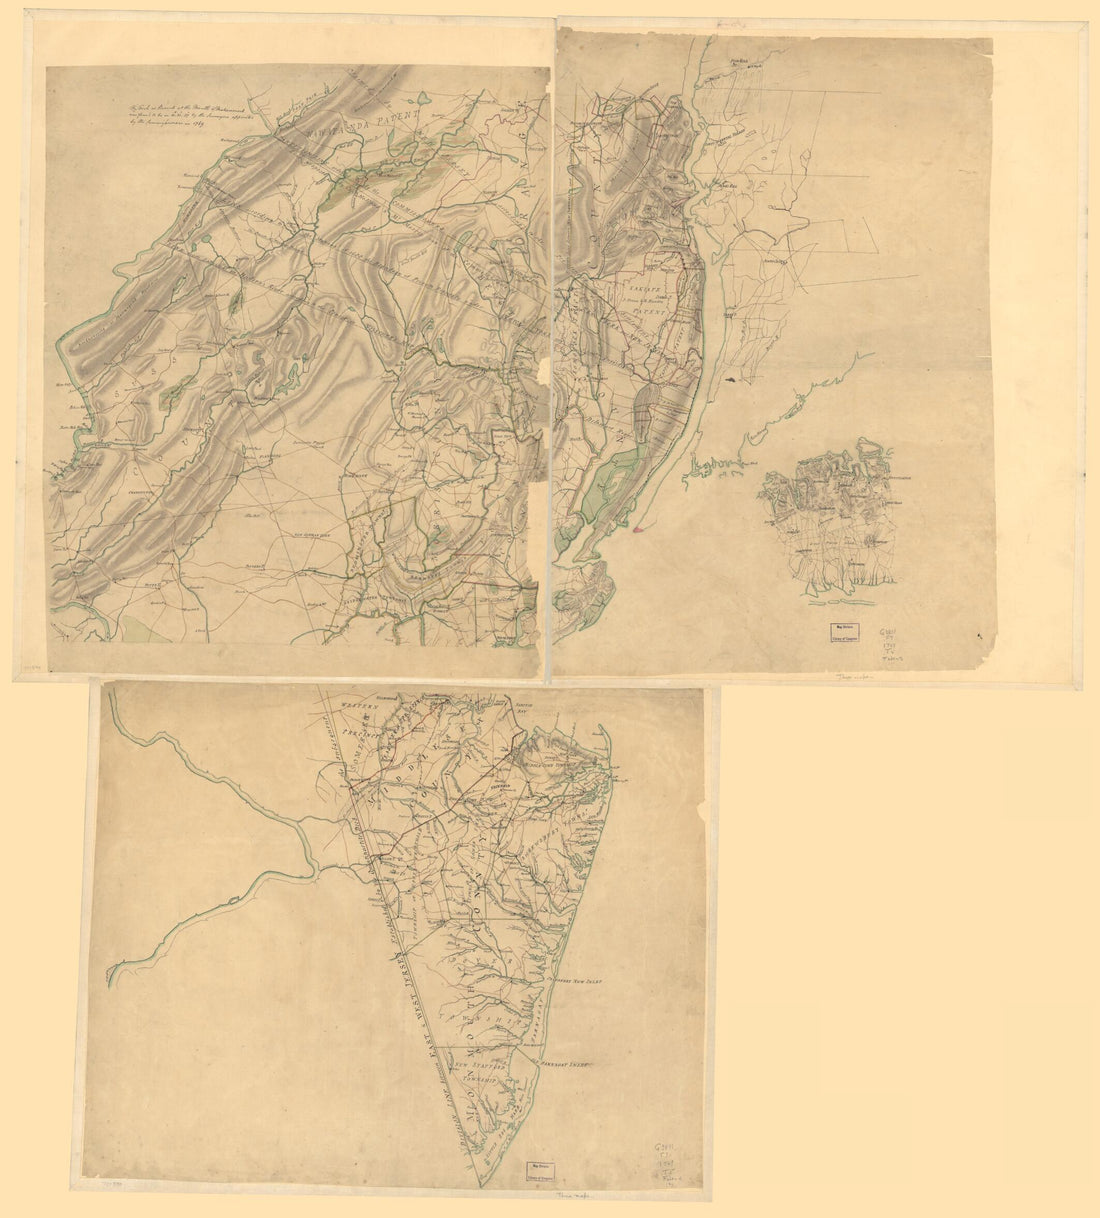 This old map of Three Maps i.e. Map On 3 Sheets of Northern New Jersey, With Reference to the Boundary Between New York and New Jersey. (Three Maps of Northern New Jersey, With Reference to the Boundary Between New York and New Jersey) from 1769 was crea